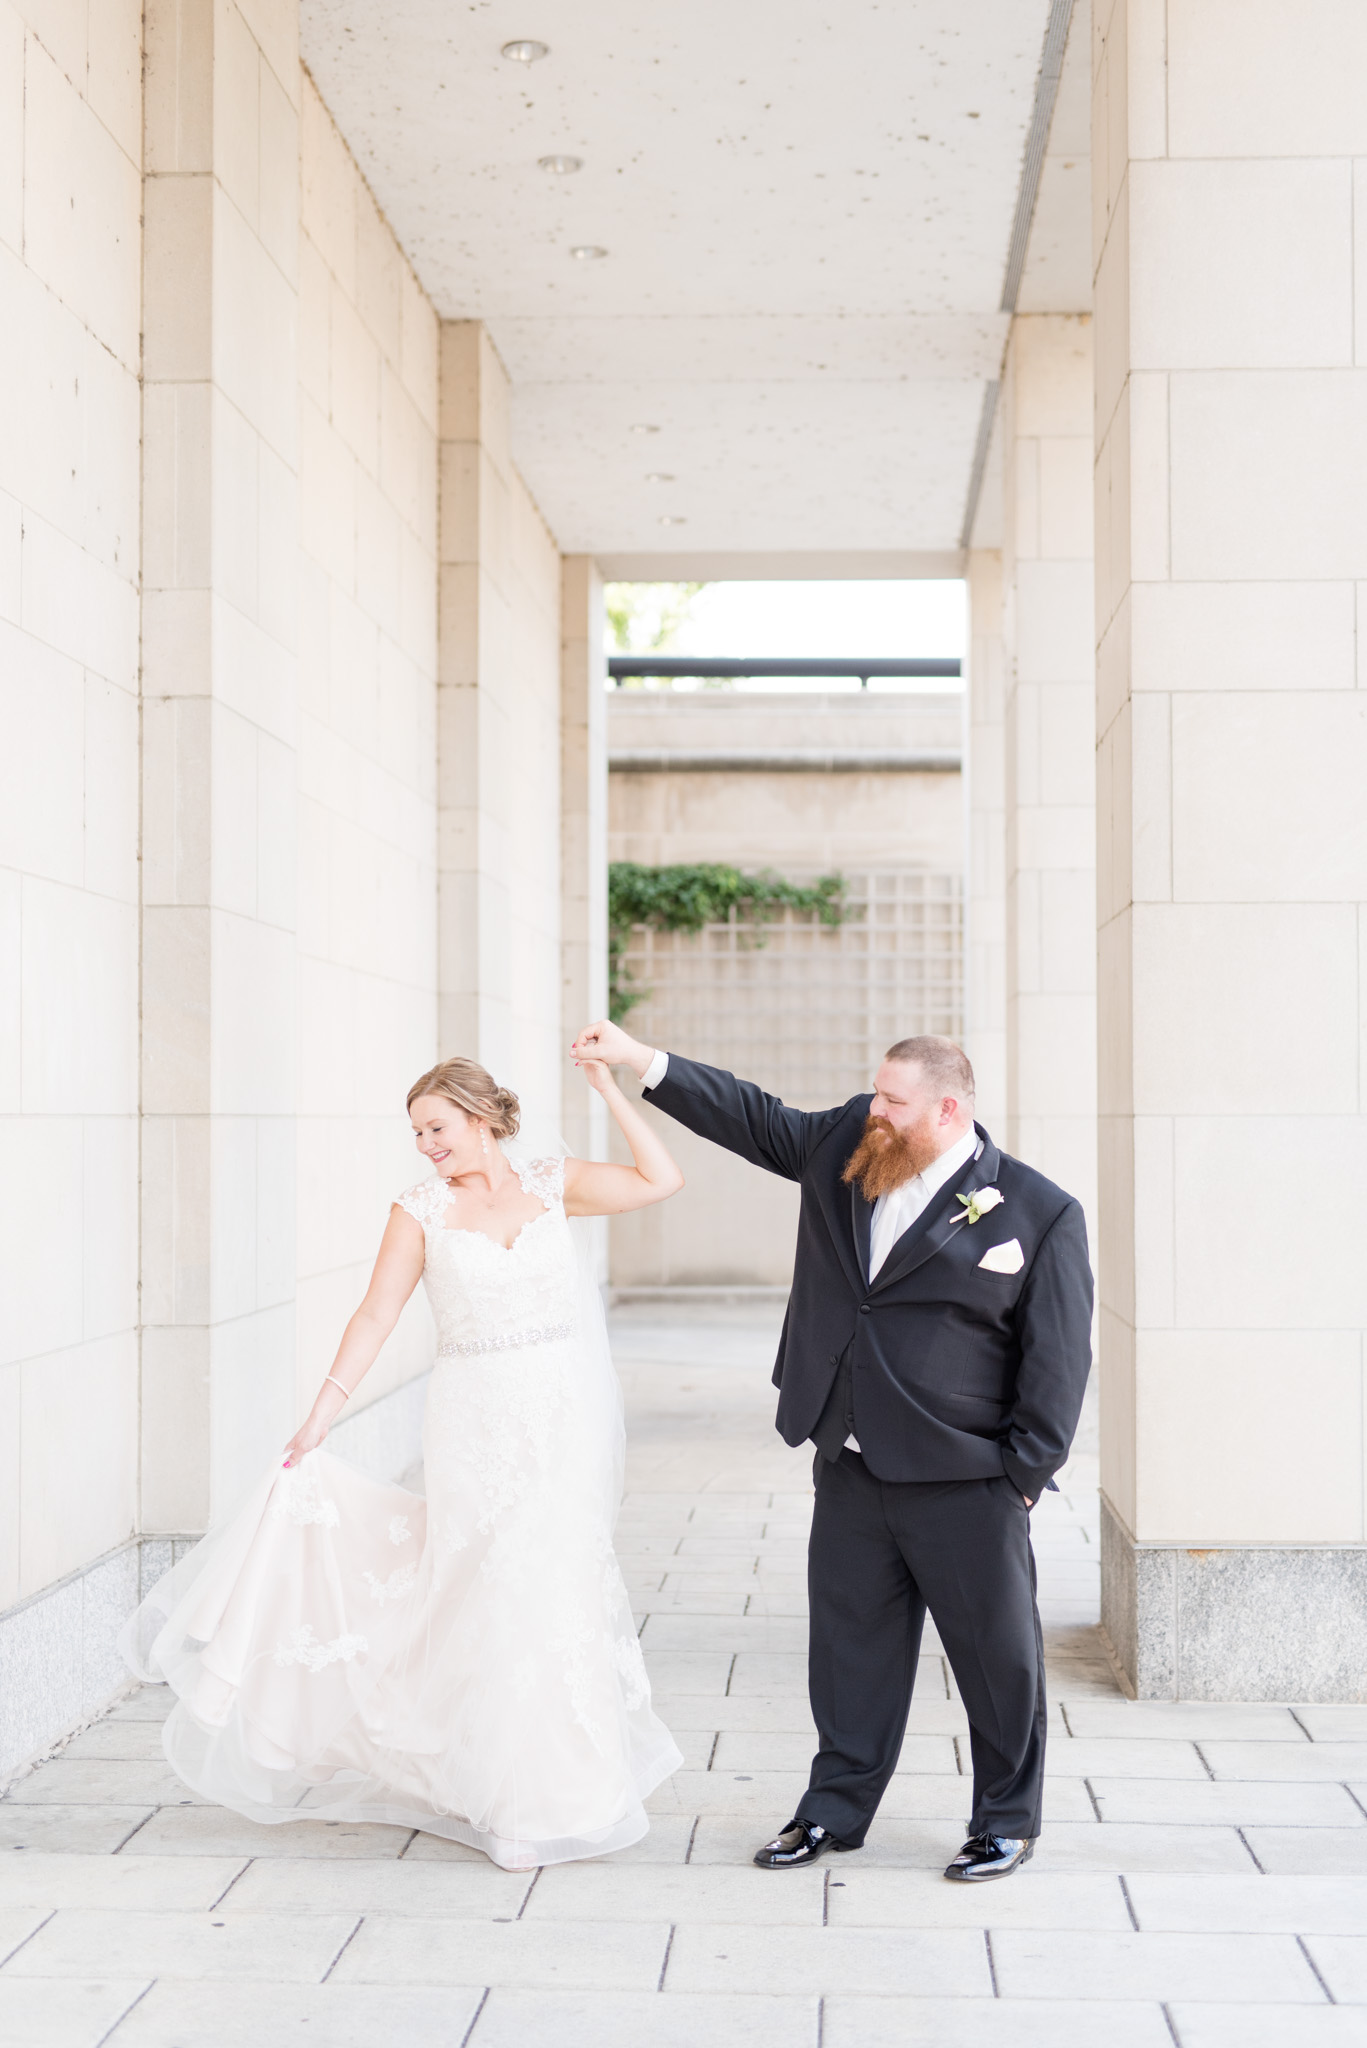 Bride is twirled by groom during luxury downtown Indianapolis wedding.